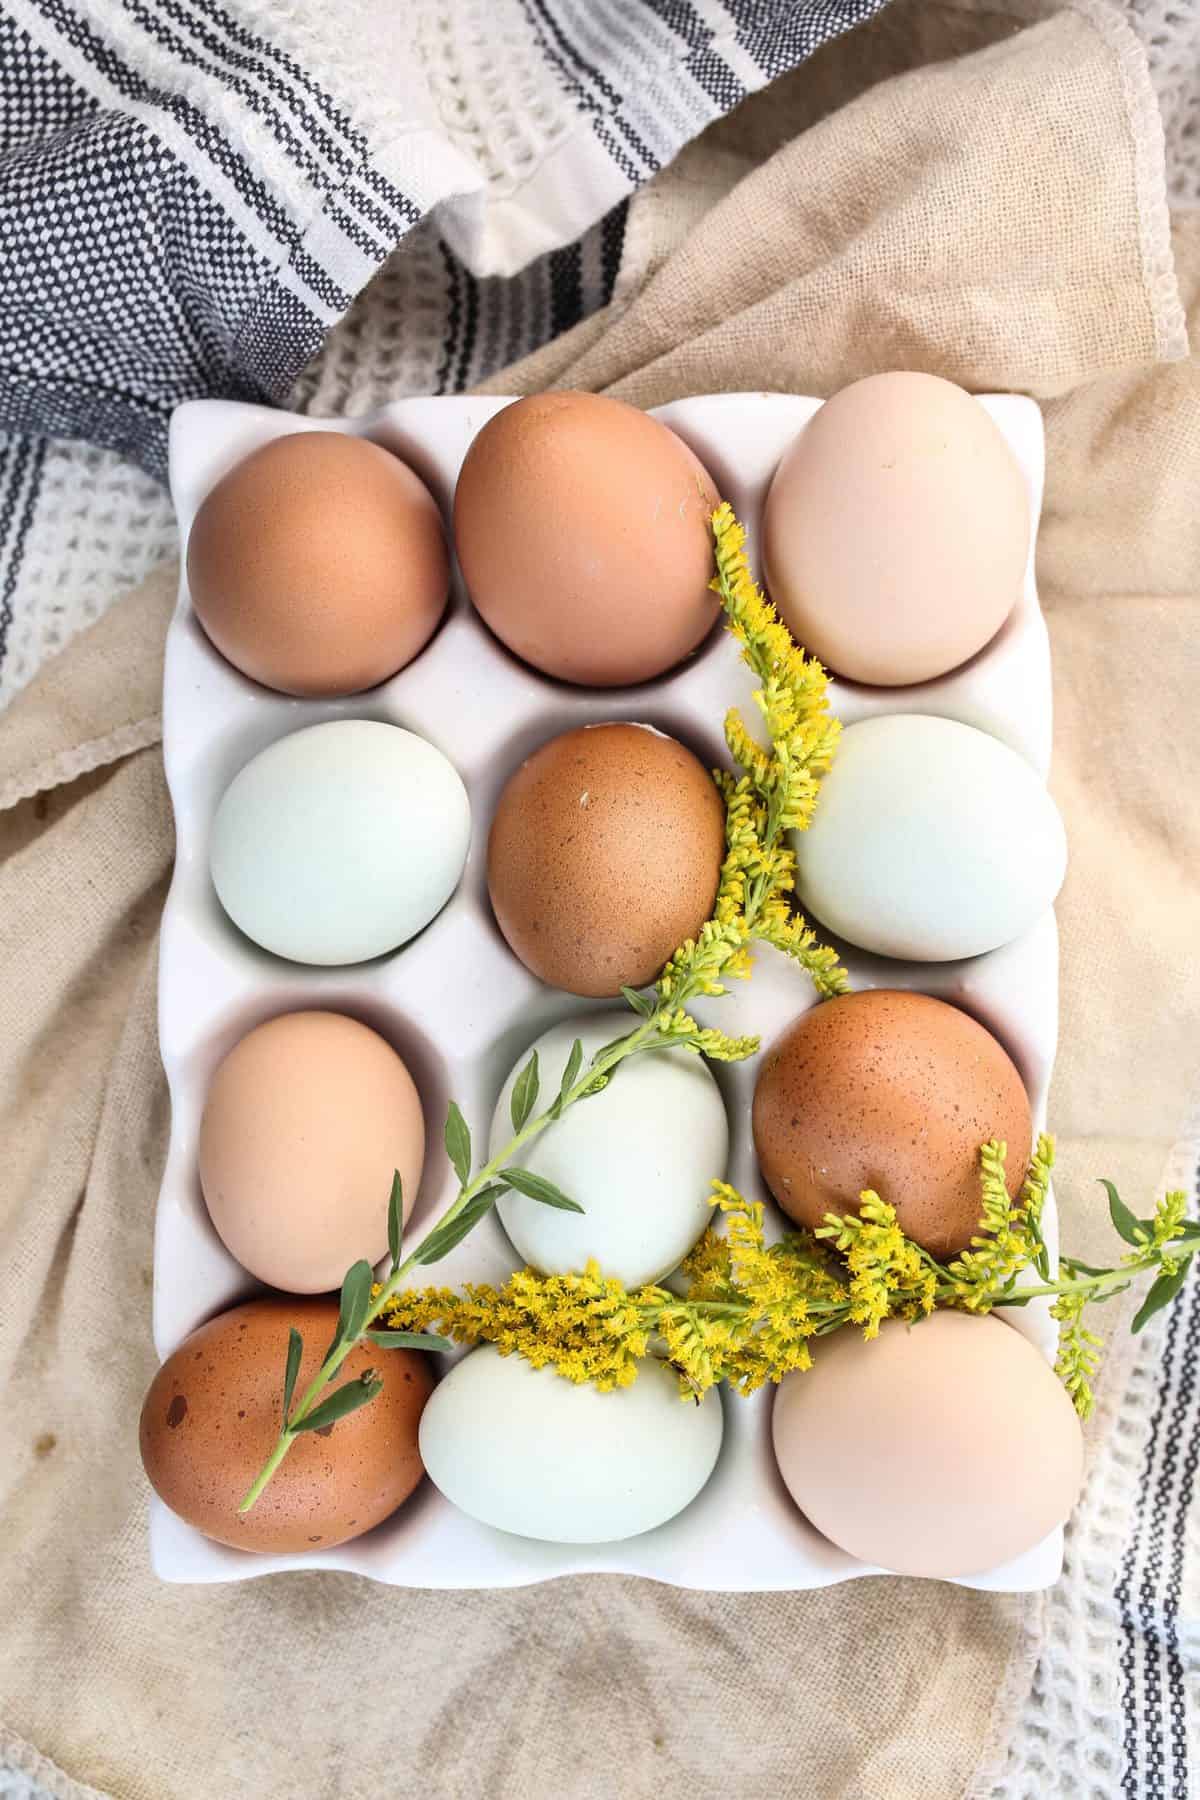 https://tastegreatfoodie.com/wp-content/uploads/2022/05/perfect-boiled-eggs-scaled.jpg